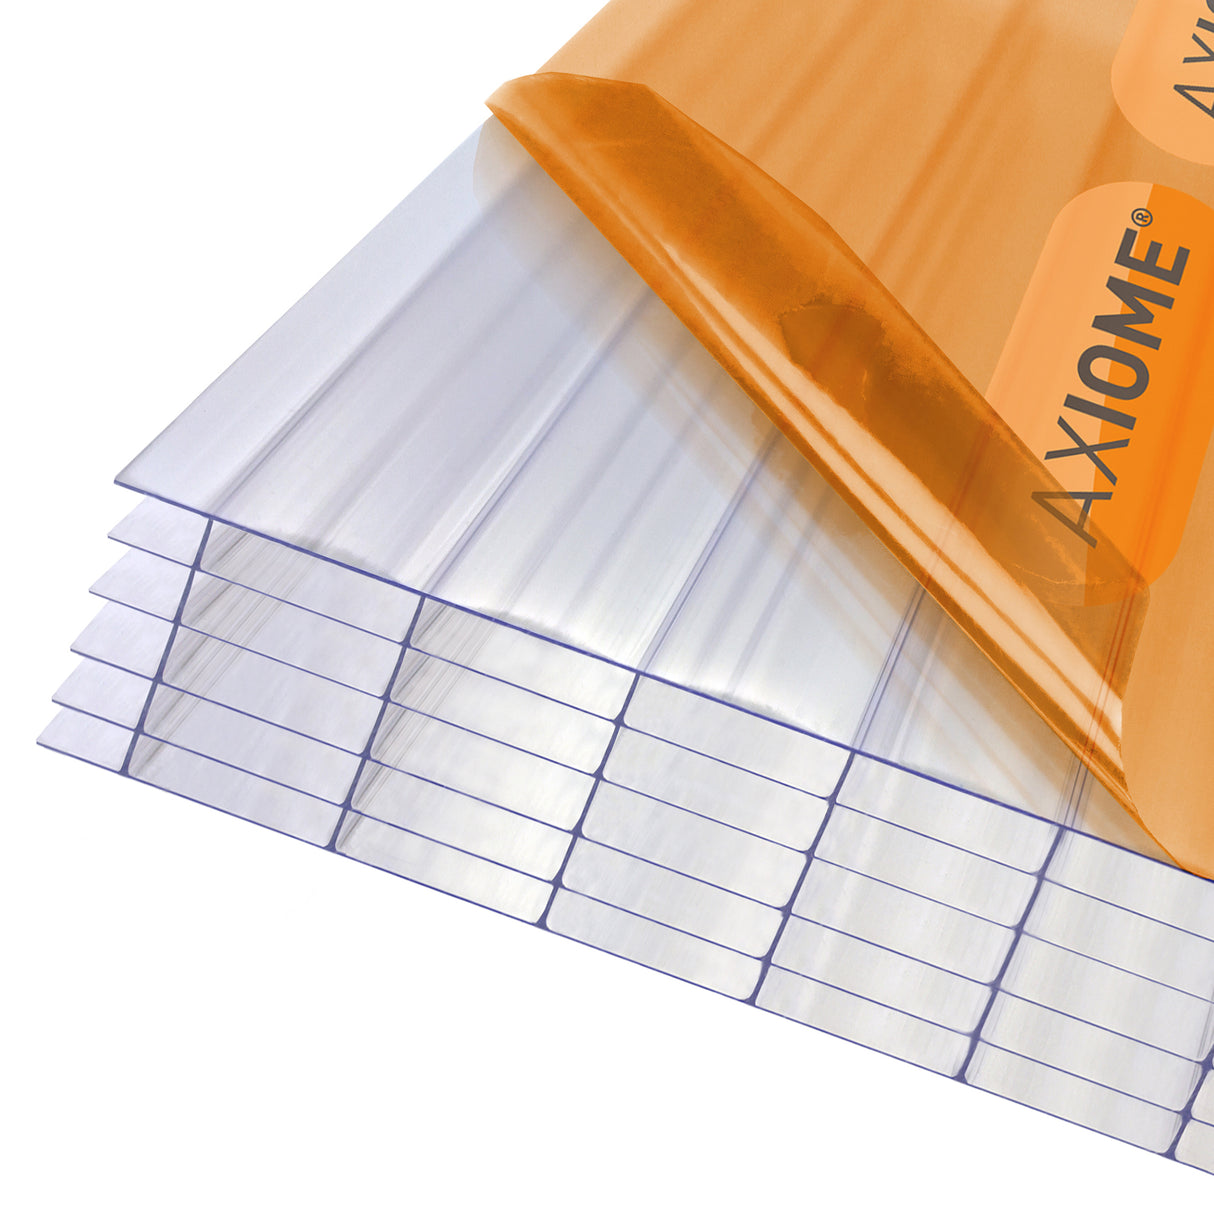 Axiome Clear 35mm Multiwall Polycarbonate Sheet